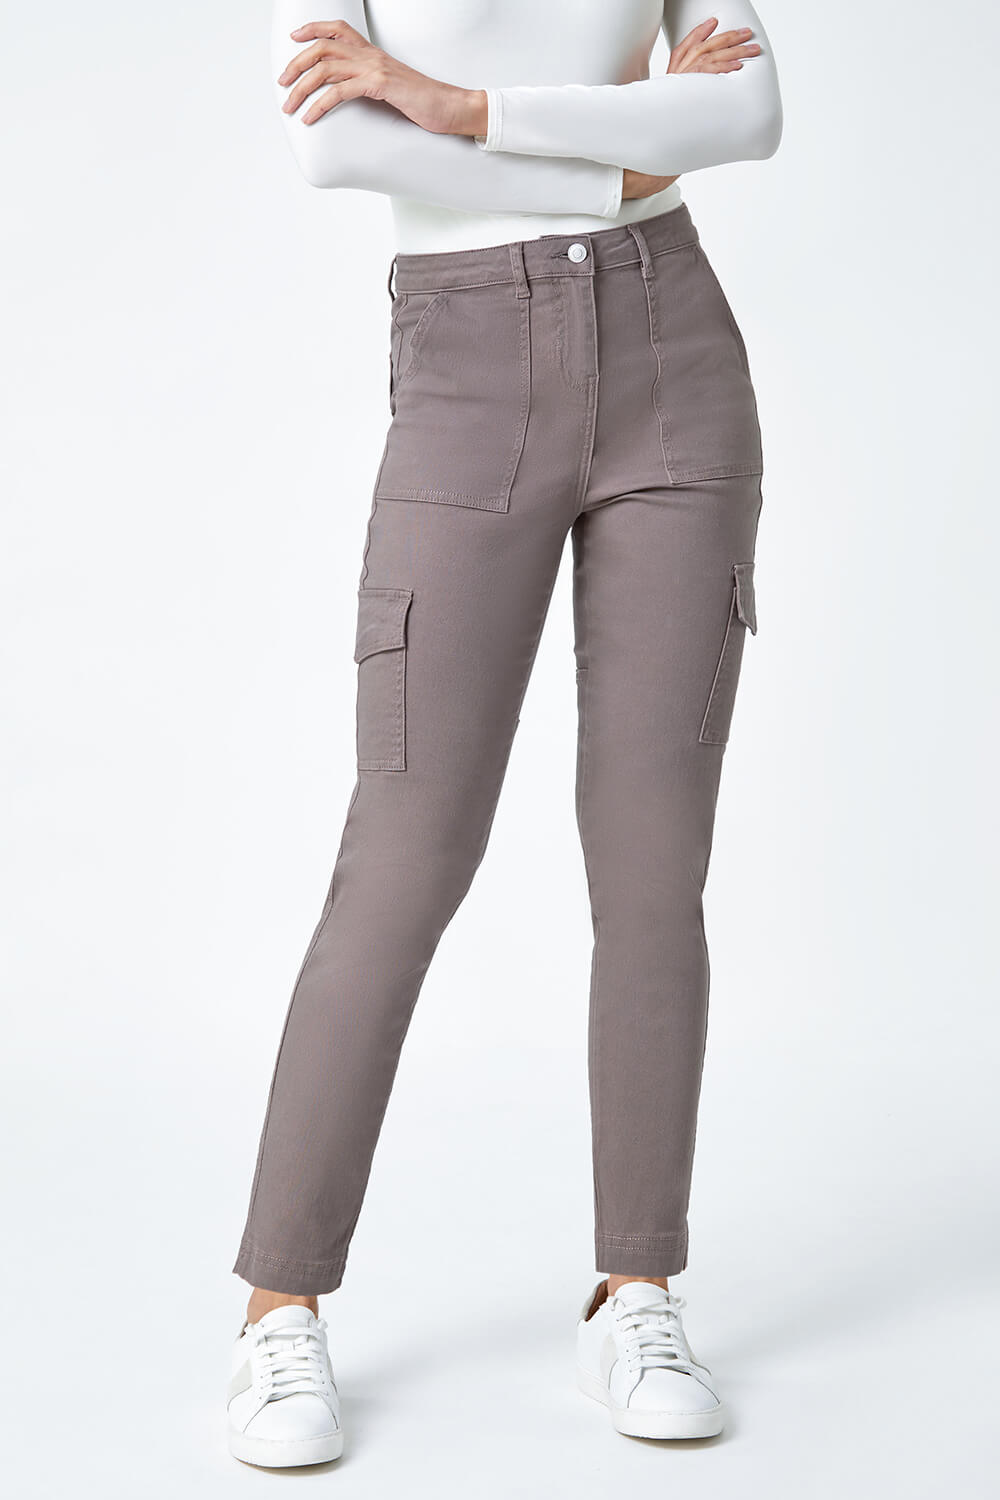 Taupe Cotton Blend Cargo Stretch Jegging, Image 4 of 5